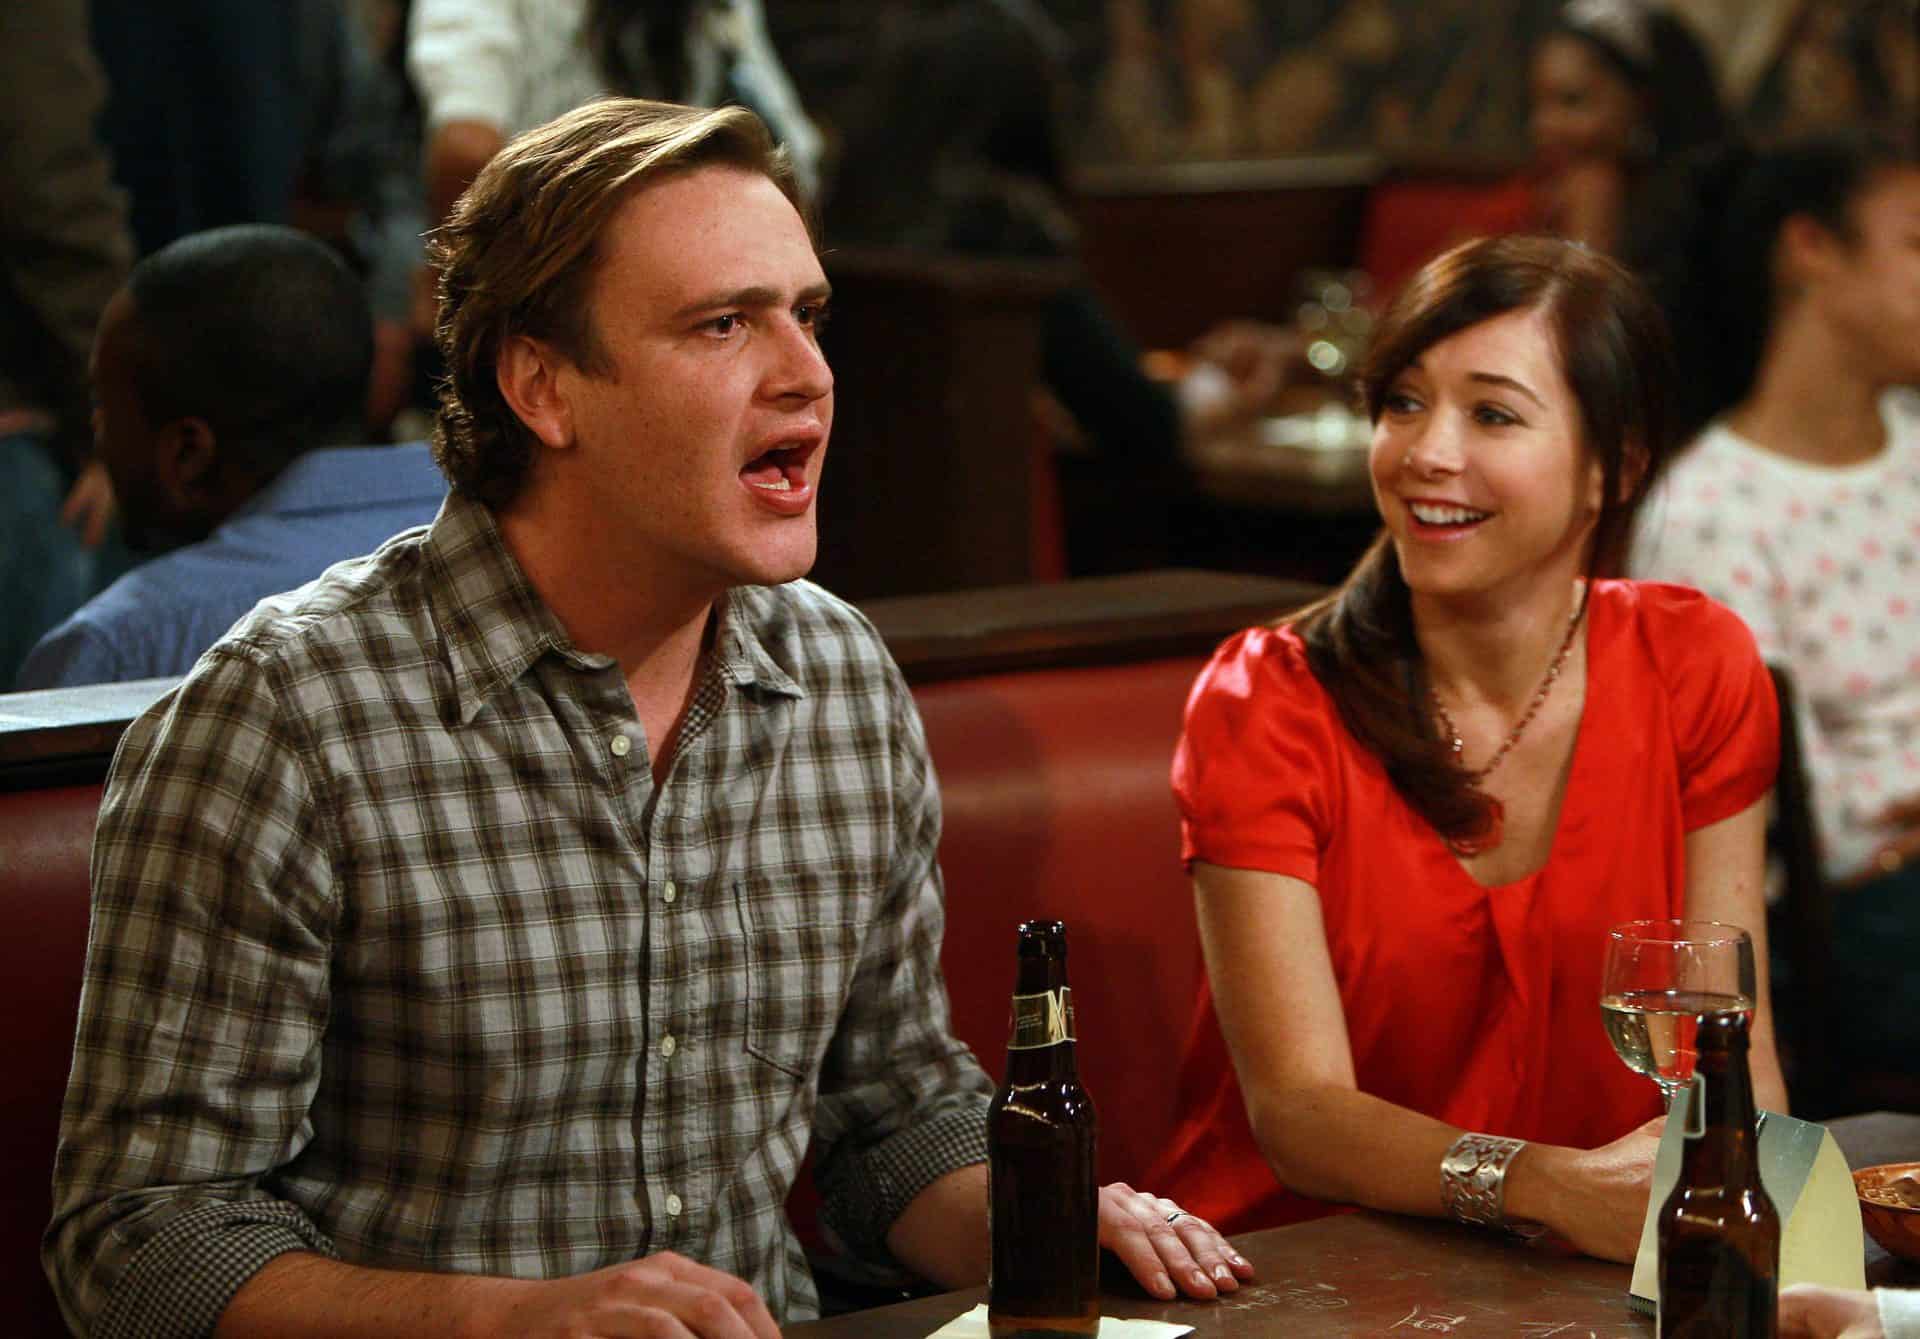 Personaggi iconici: Marshall e Lily di How I met your mother